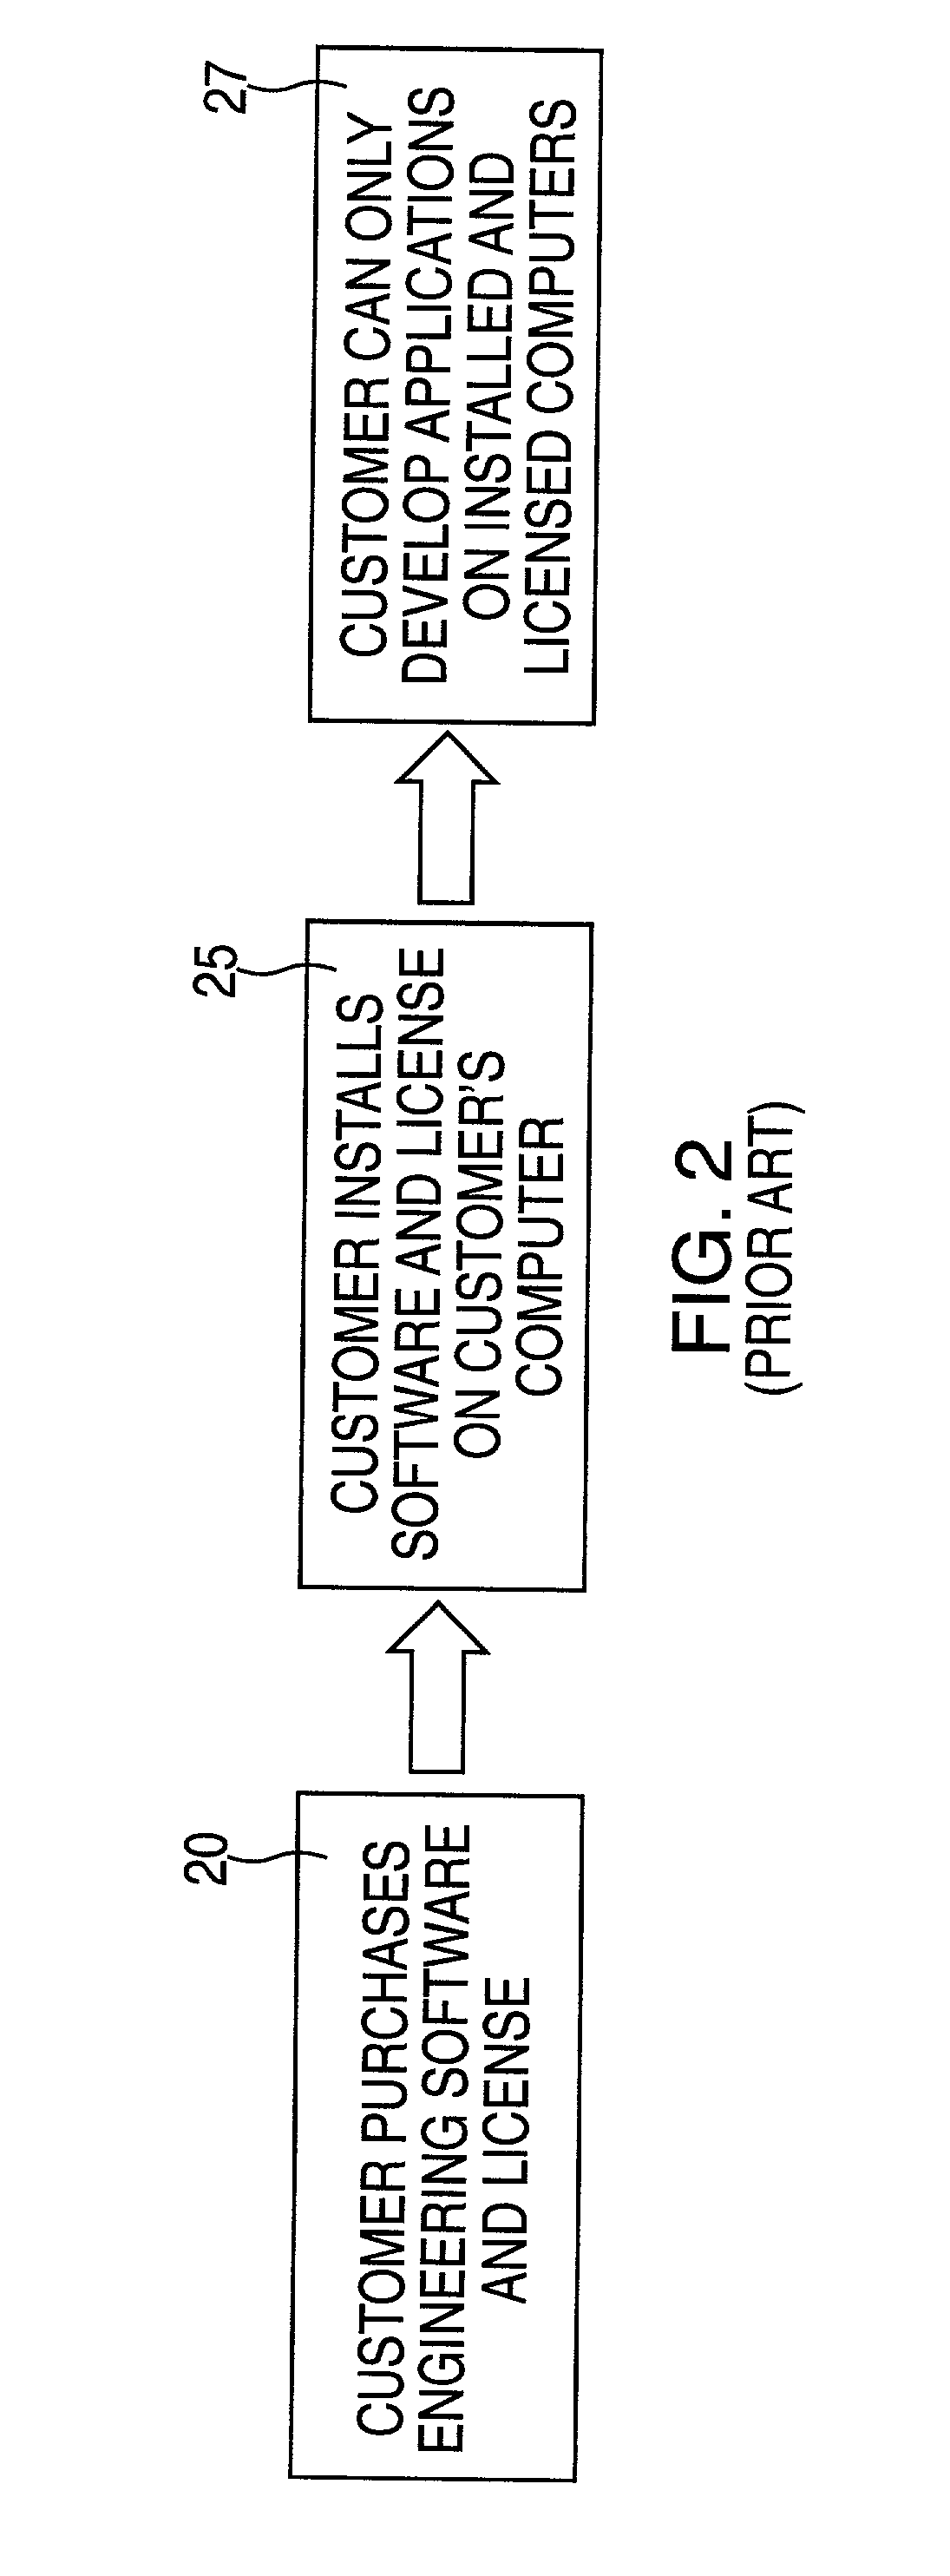 Method and apparatus for programming programmable controllers and generating configuration data from a centralized server